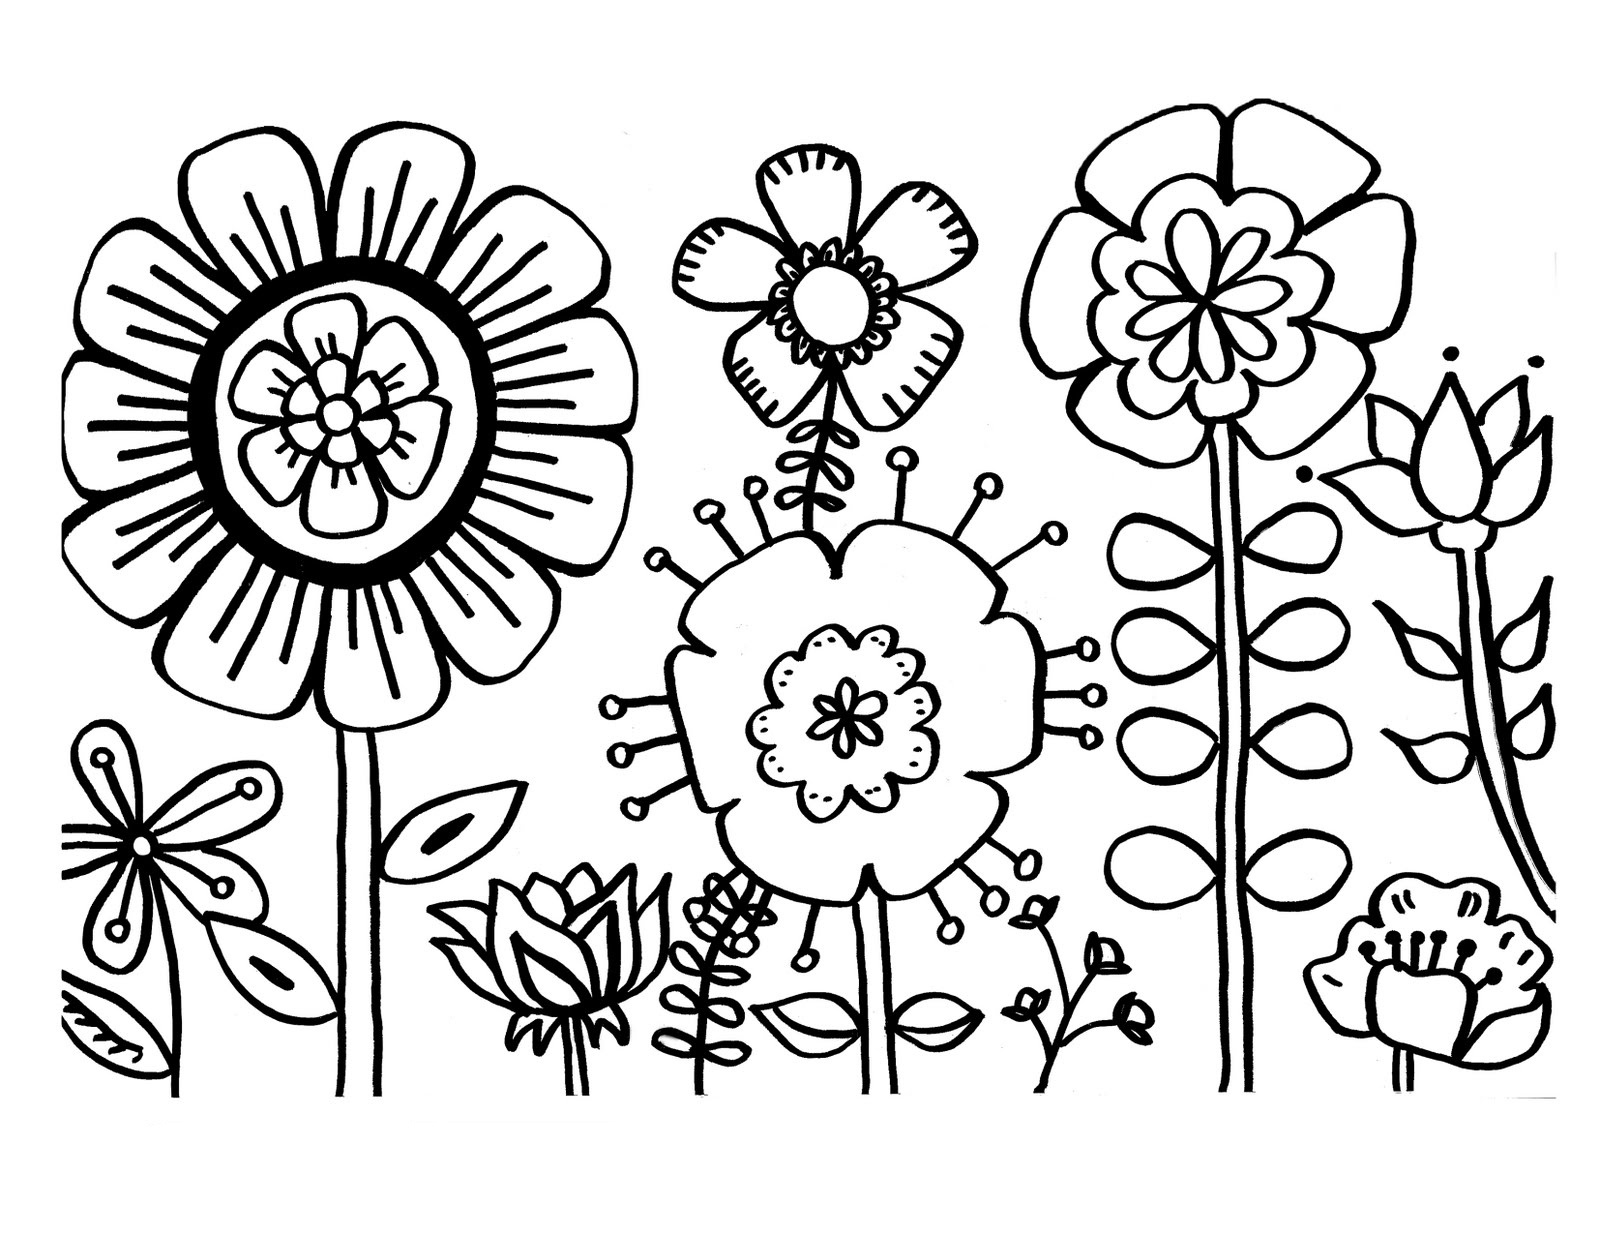 Free Printable Flower Coloring Pages For Kids - Best Coloring Pages - Free Printable Flowers